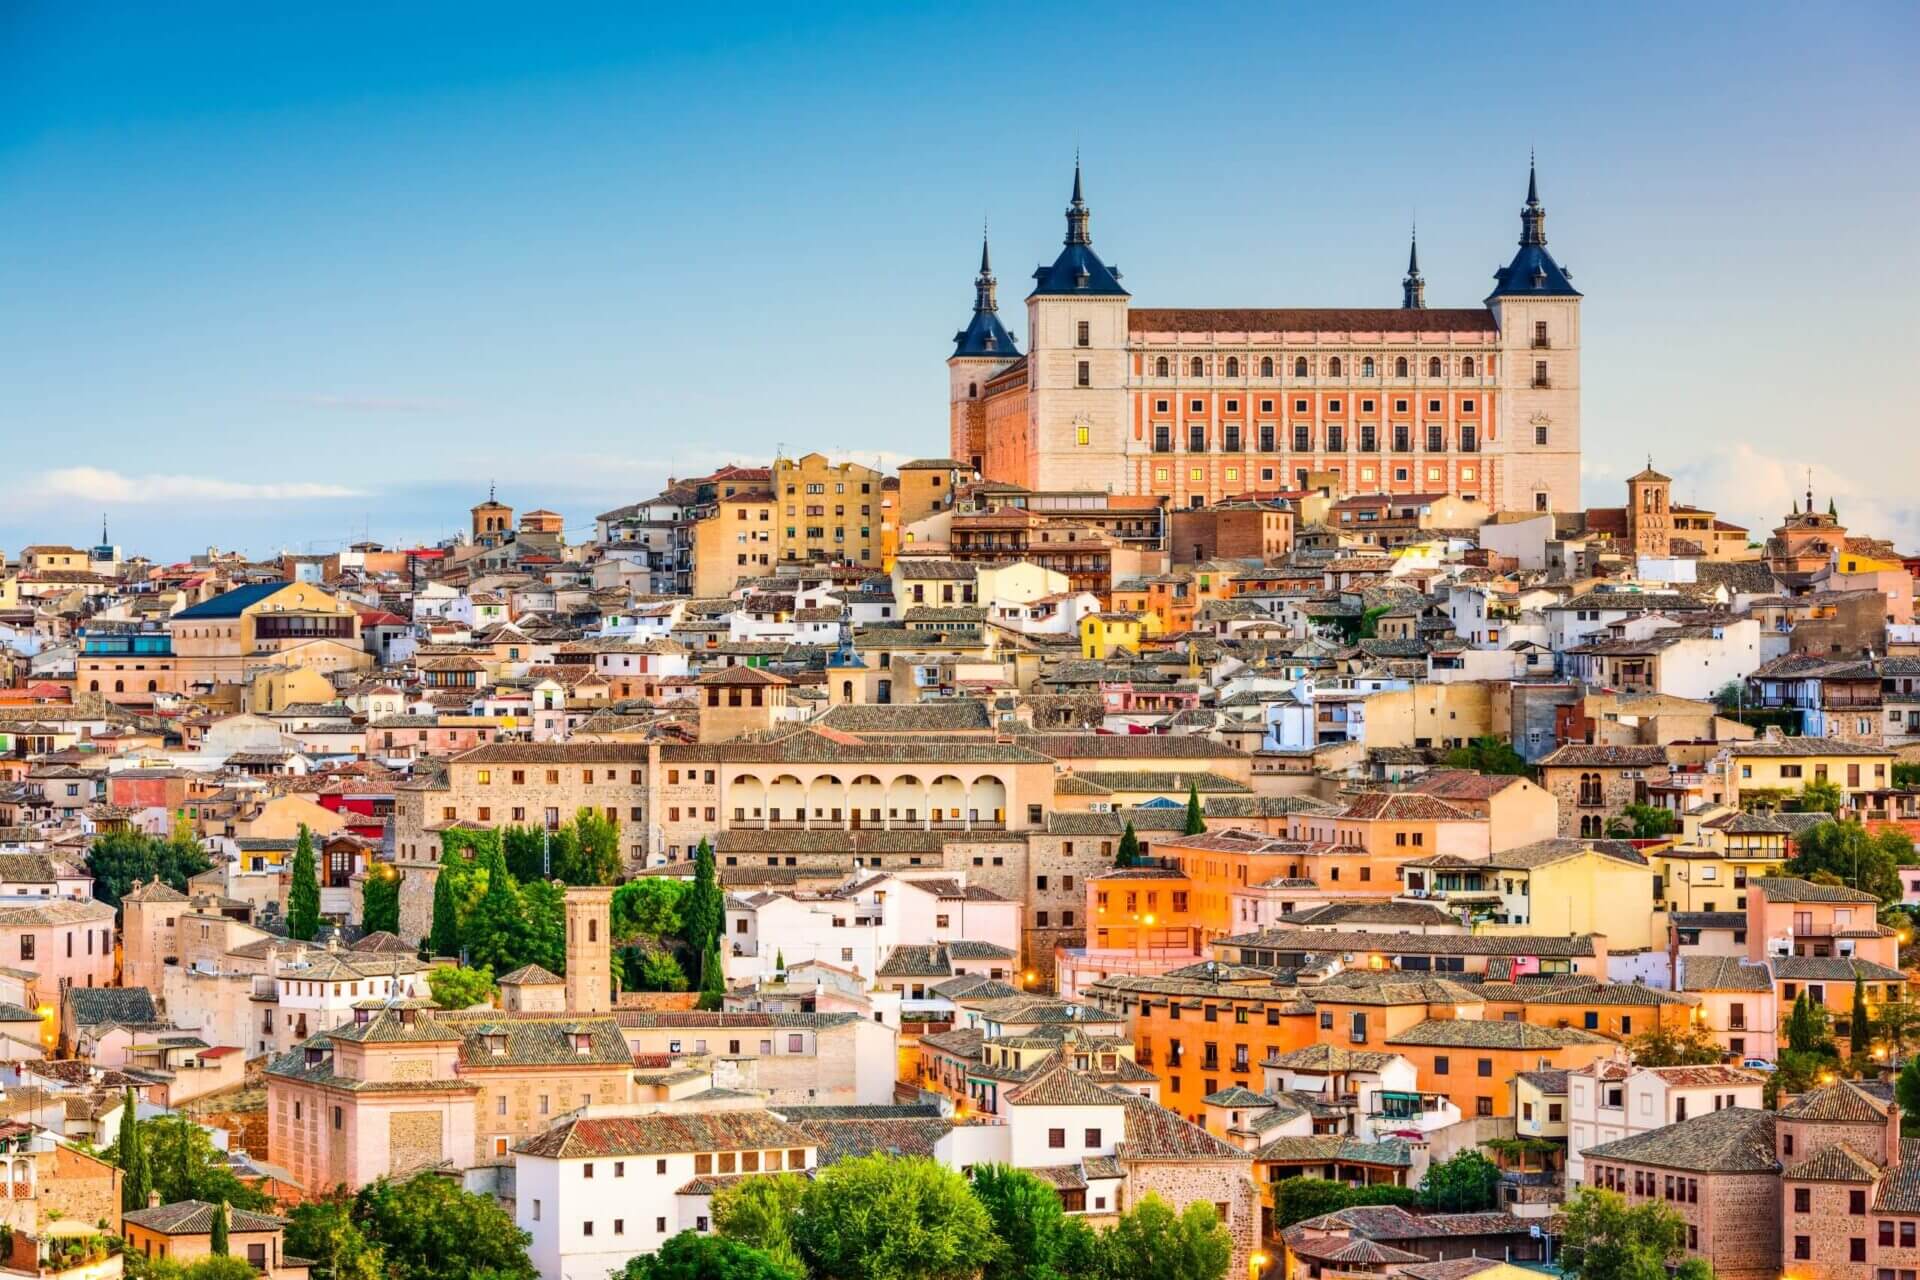 toledo-spain-old-town-cityscape-at-the-alcazar-stockpack-istock